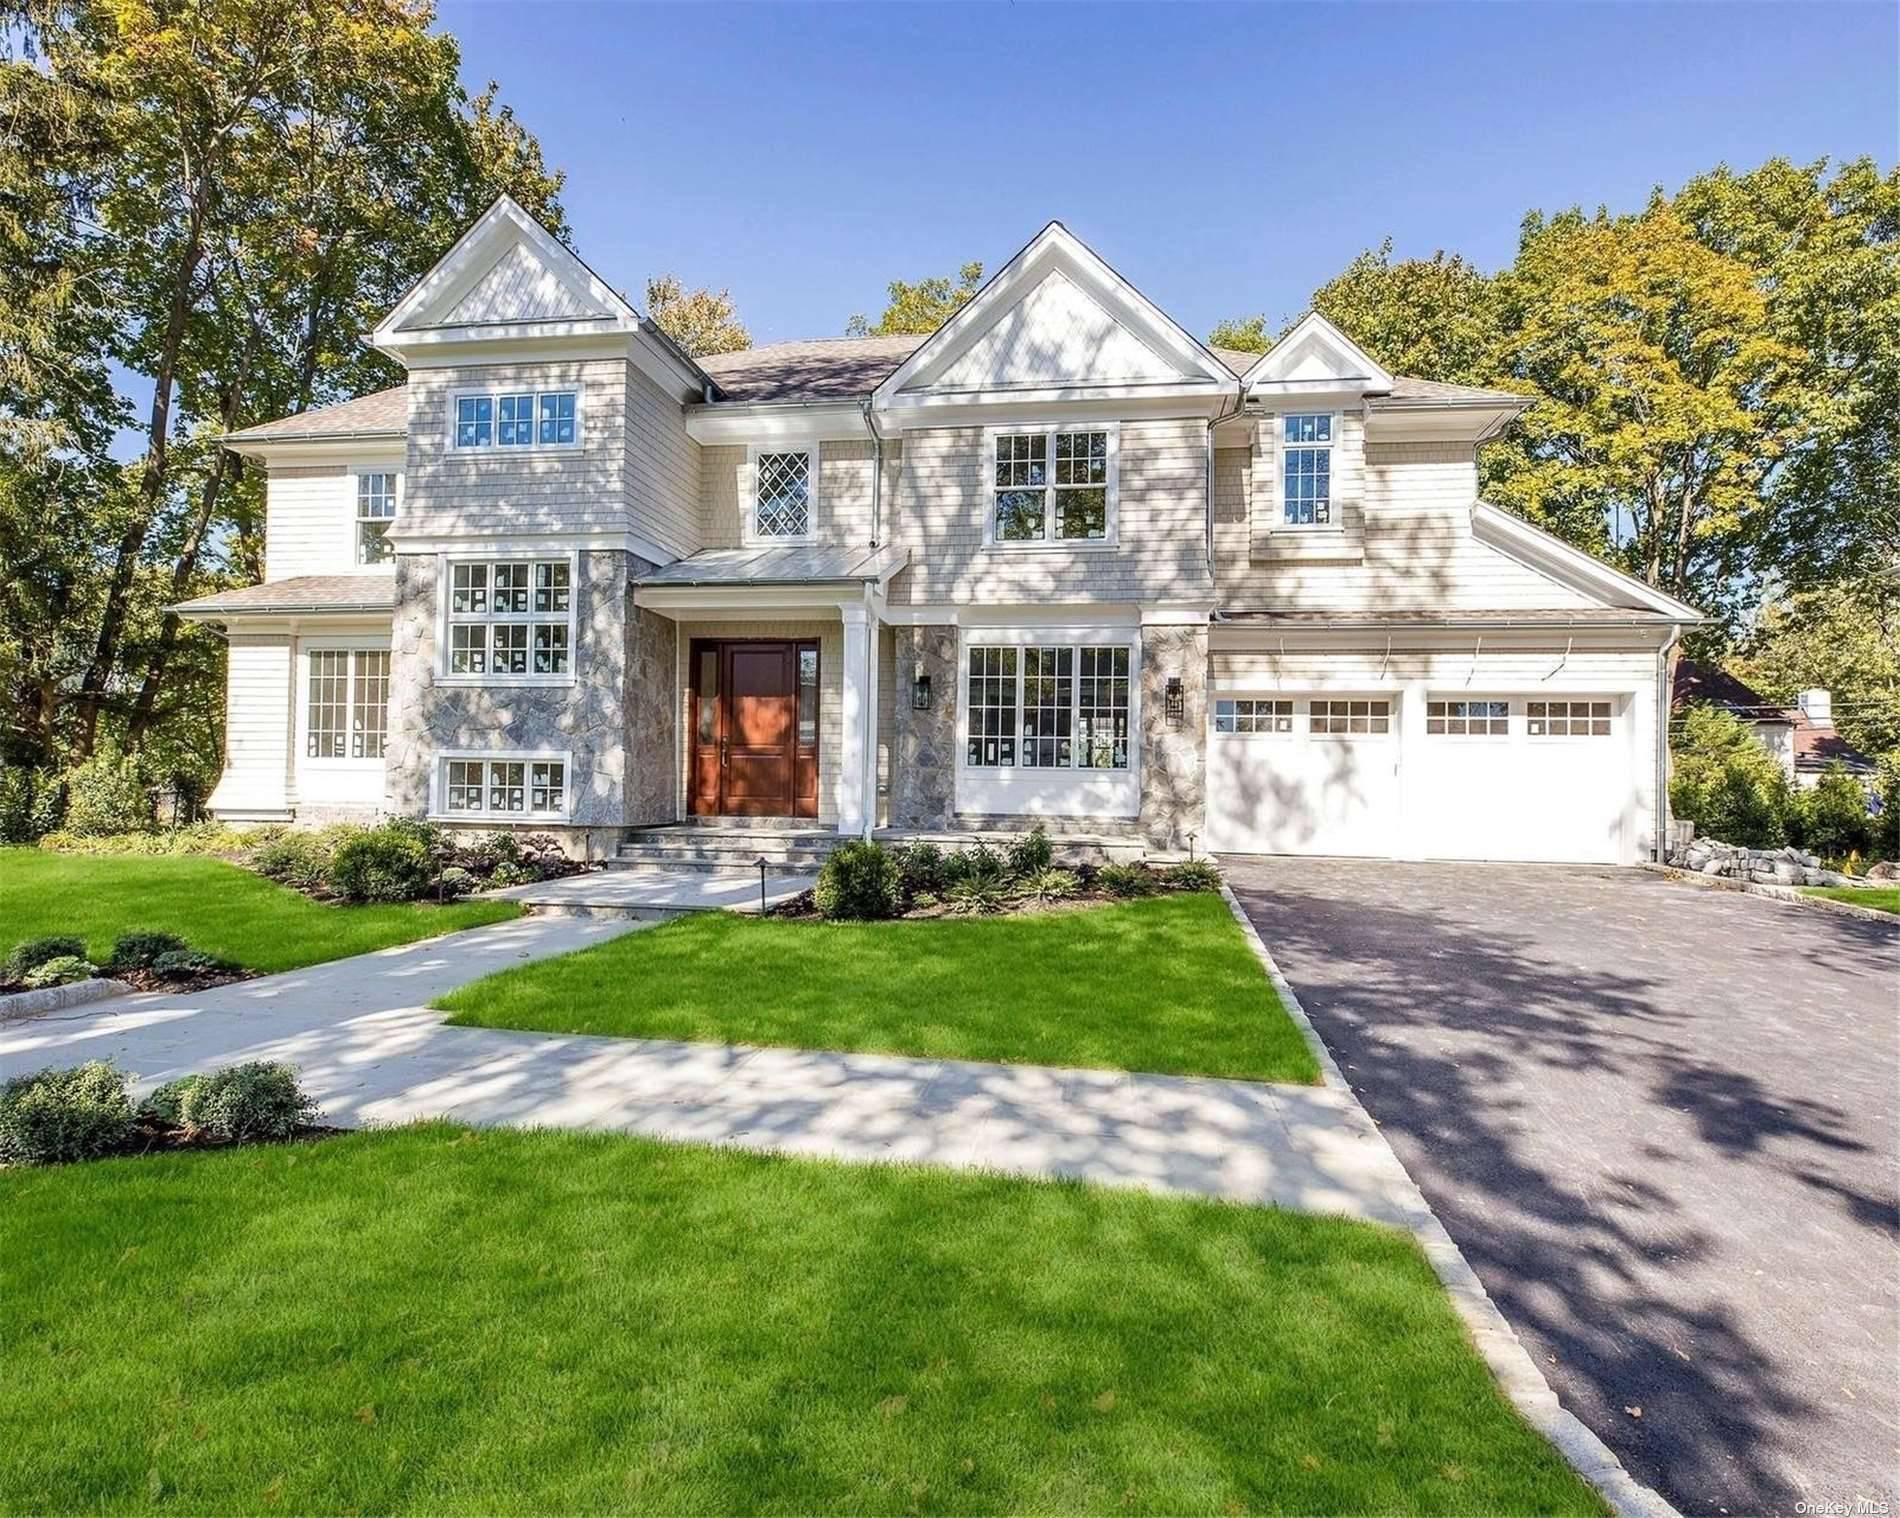 The Hamptons Meet Great Neck With This 6 Bedroom 6.